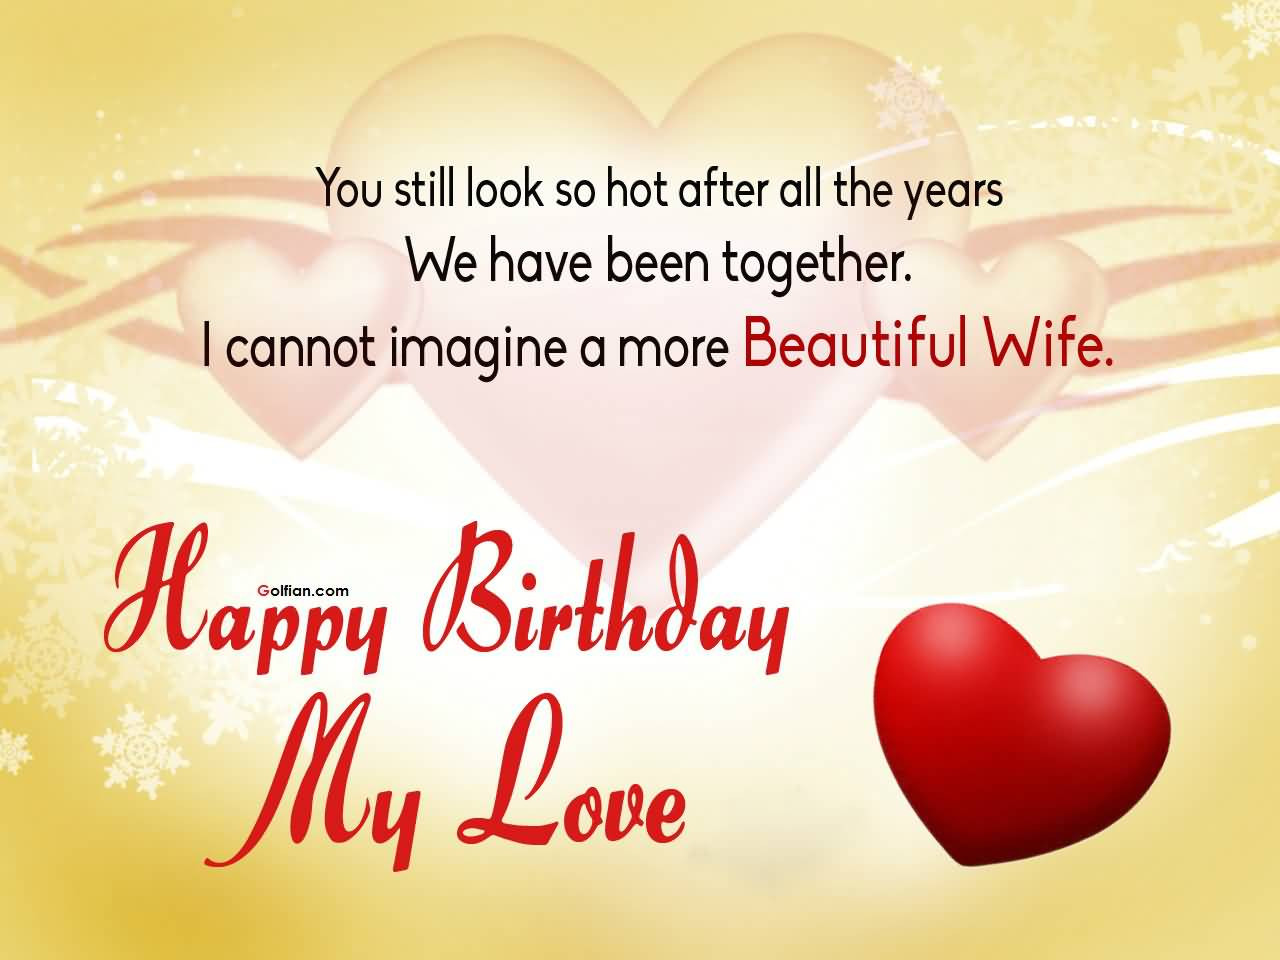 Happy Birthday Wife Quote
 60 Most Beautiful Wife Birthday Quotes – Nice Birthday